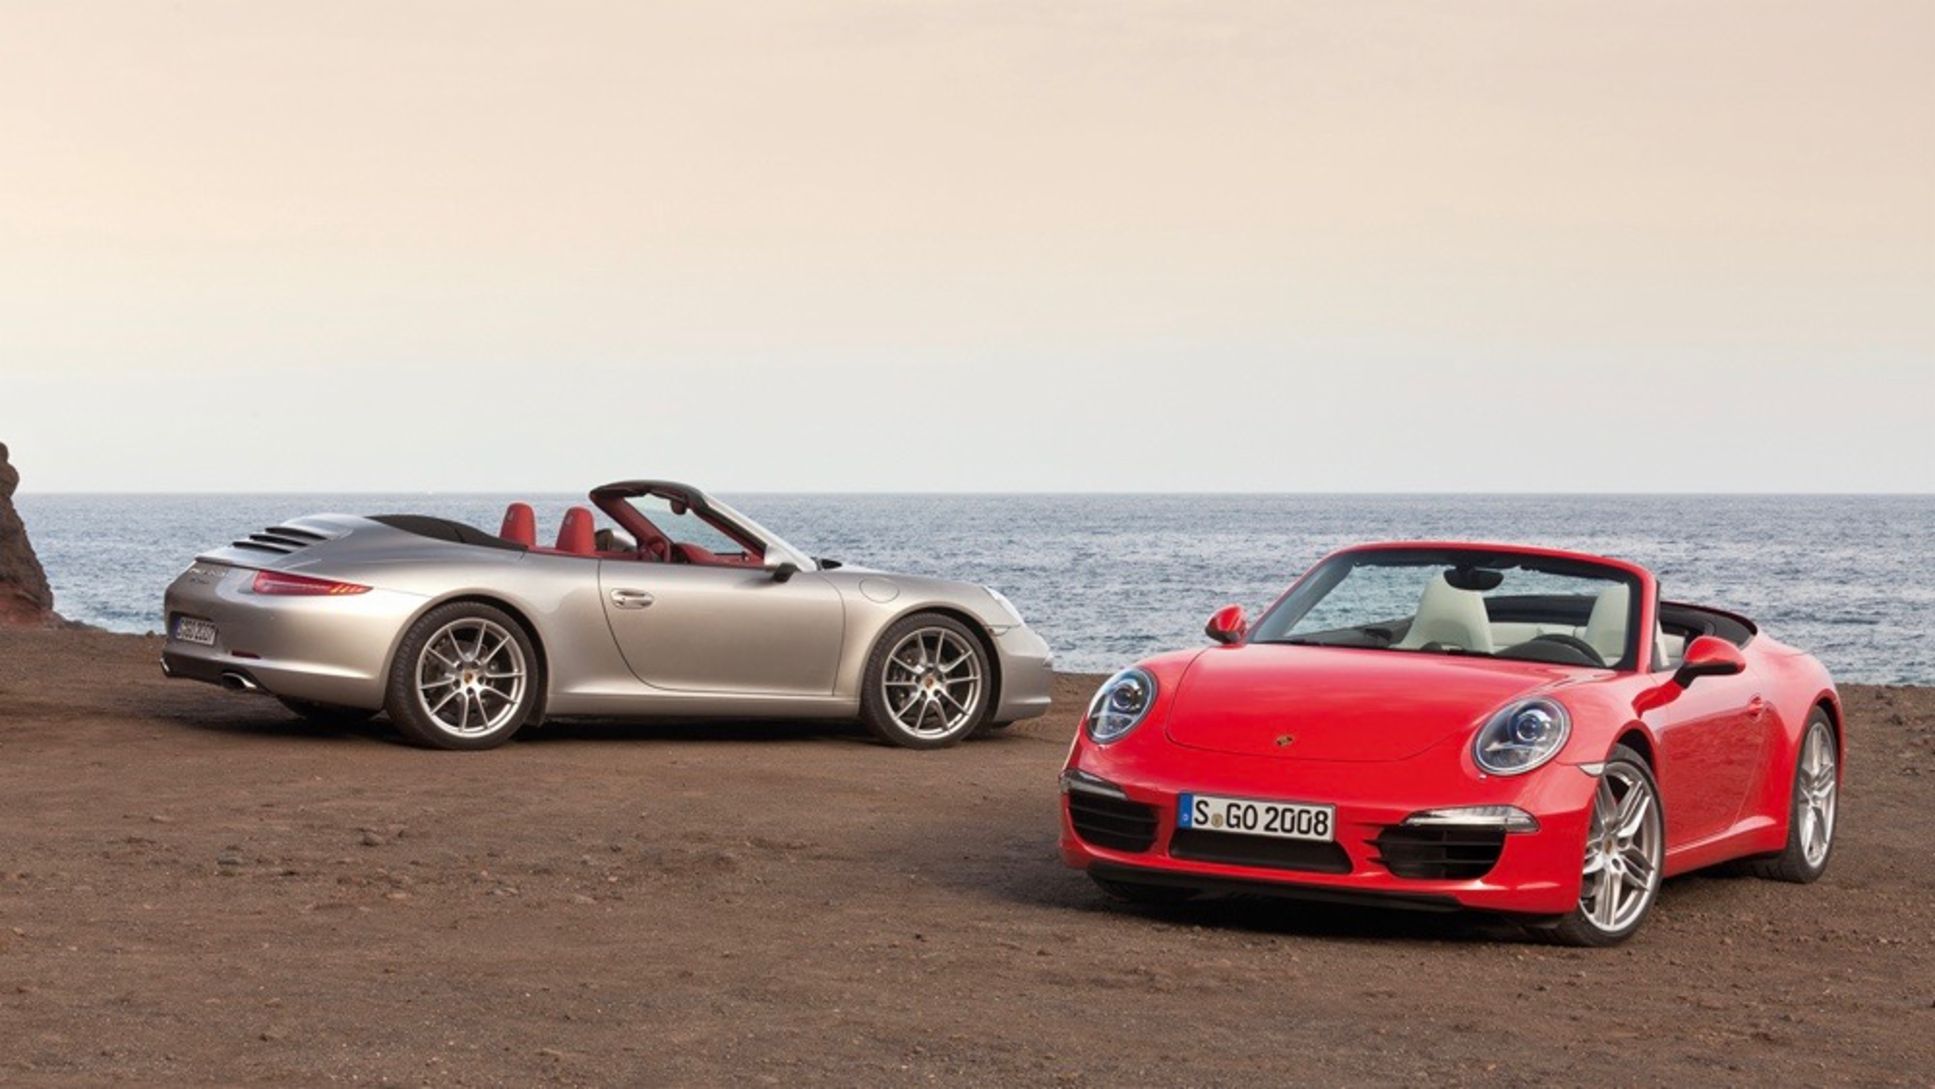 Debut for 911 Carrera Cabriolet with innovative roof concept - Porsche  Newsroom